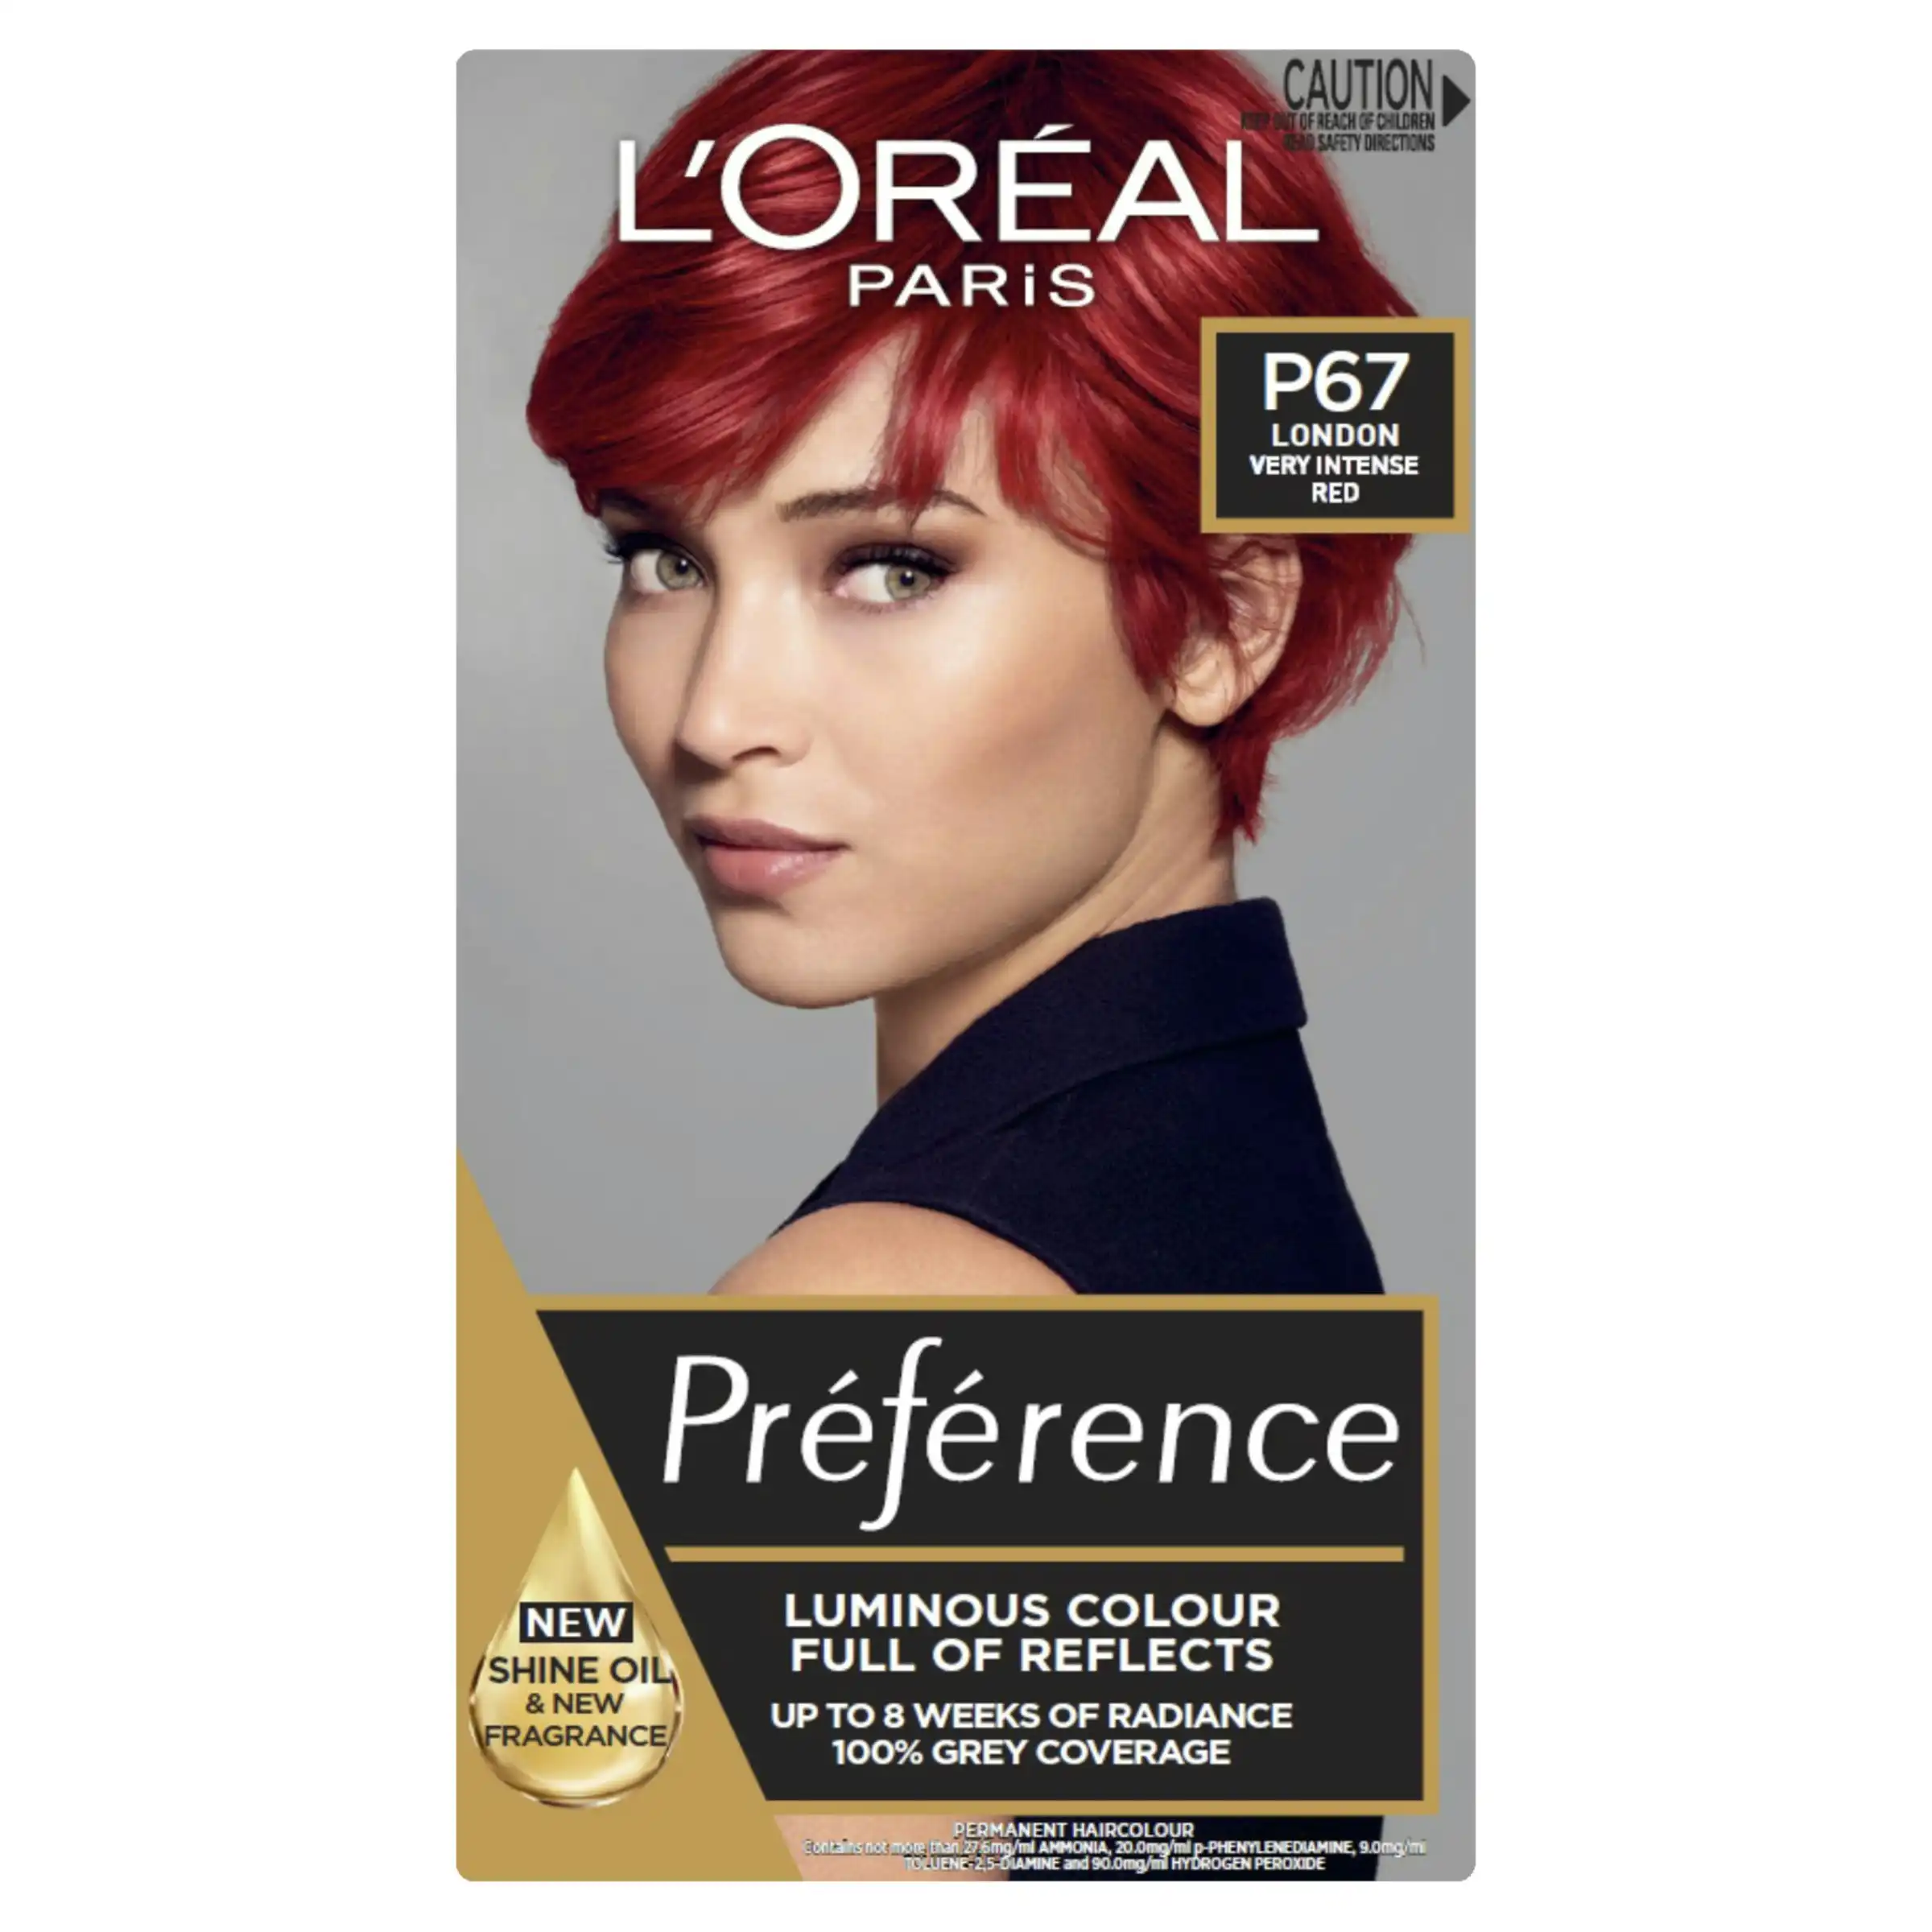 L'Oreal Paris Preference P67 London Very Intense Red